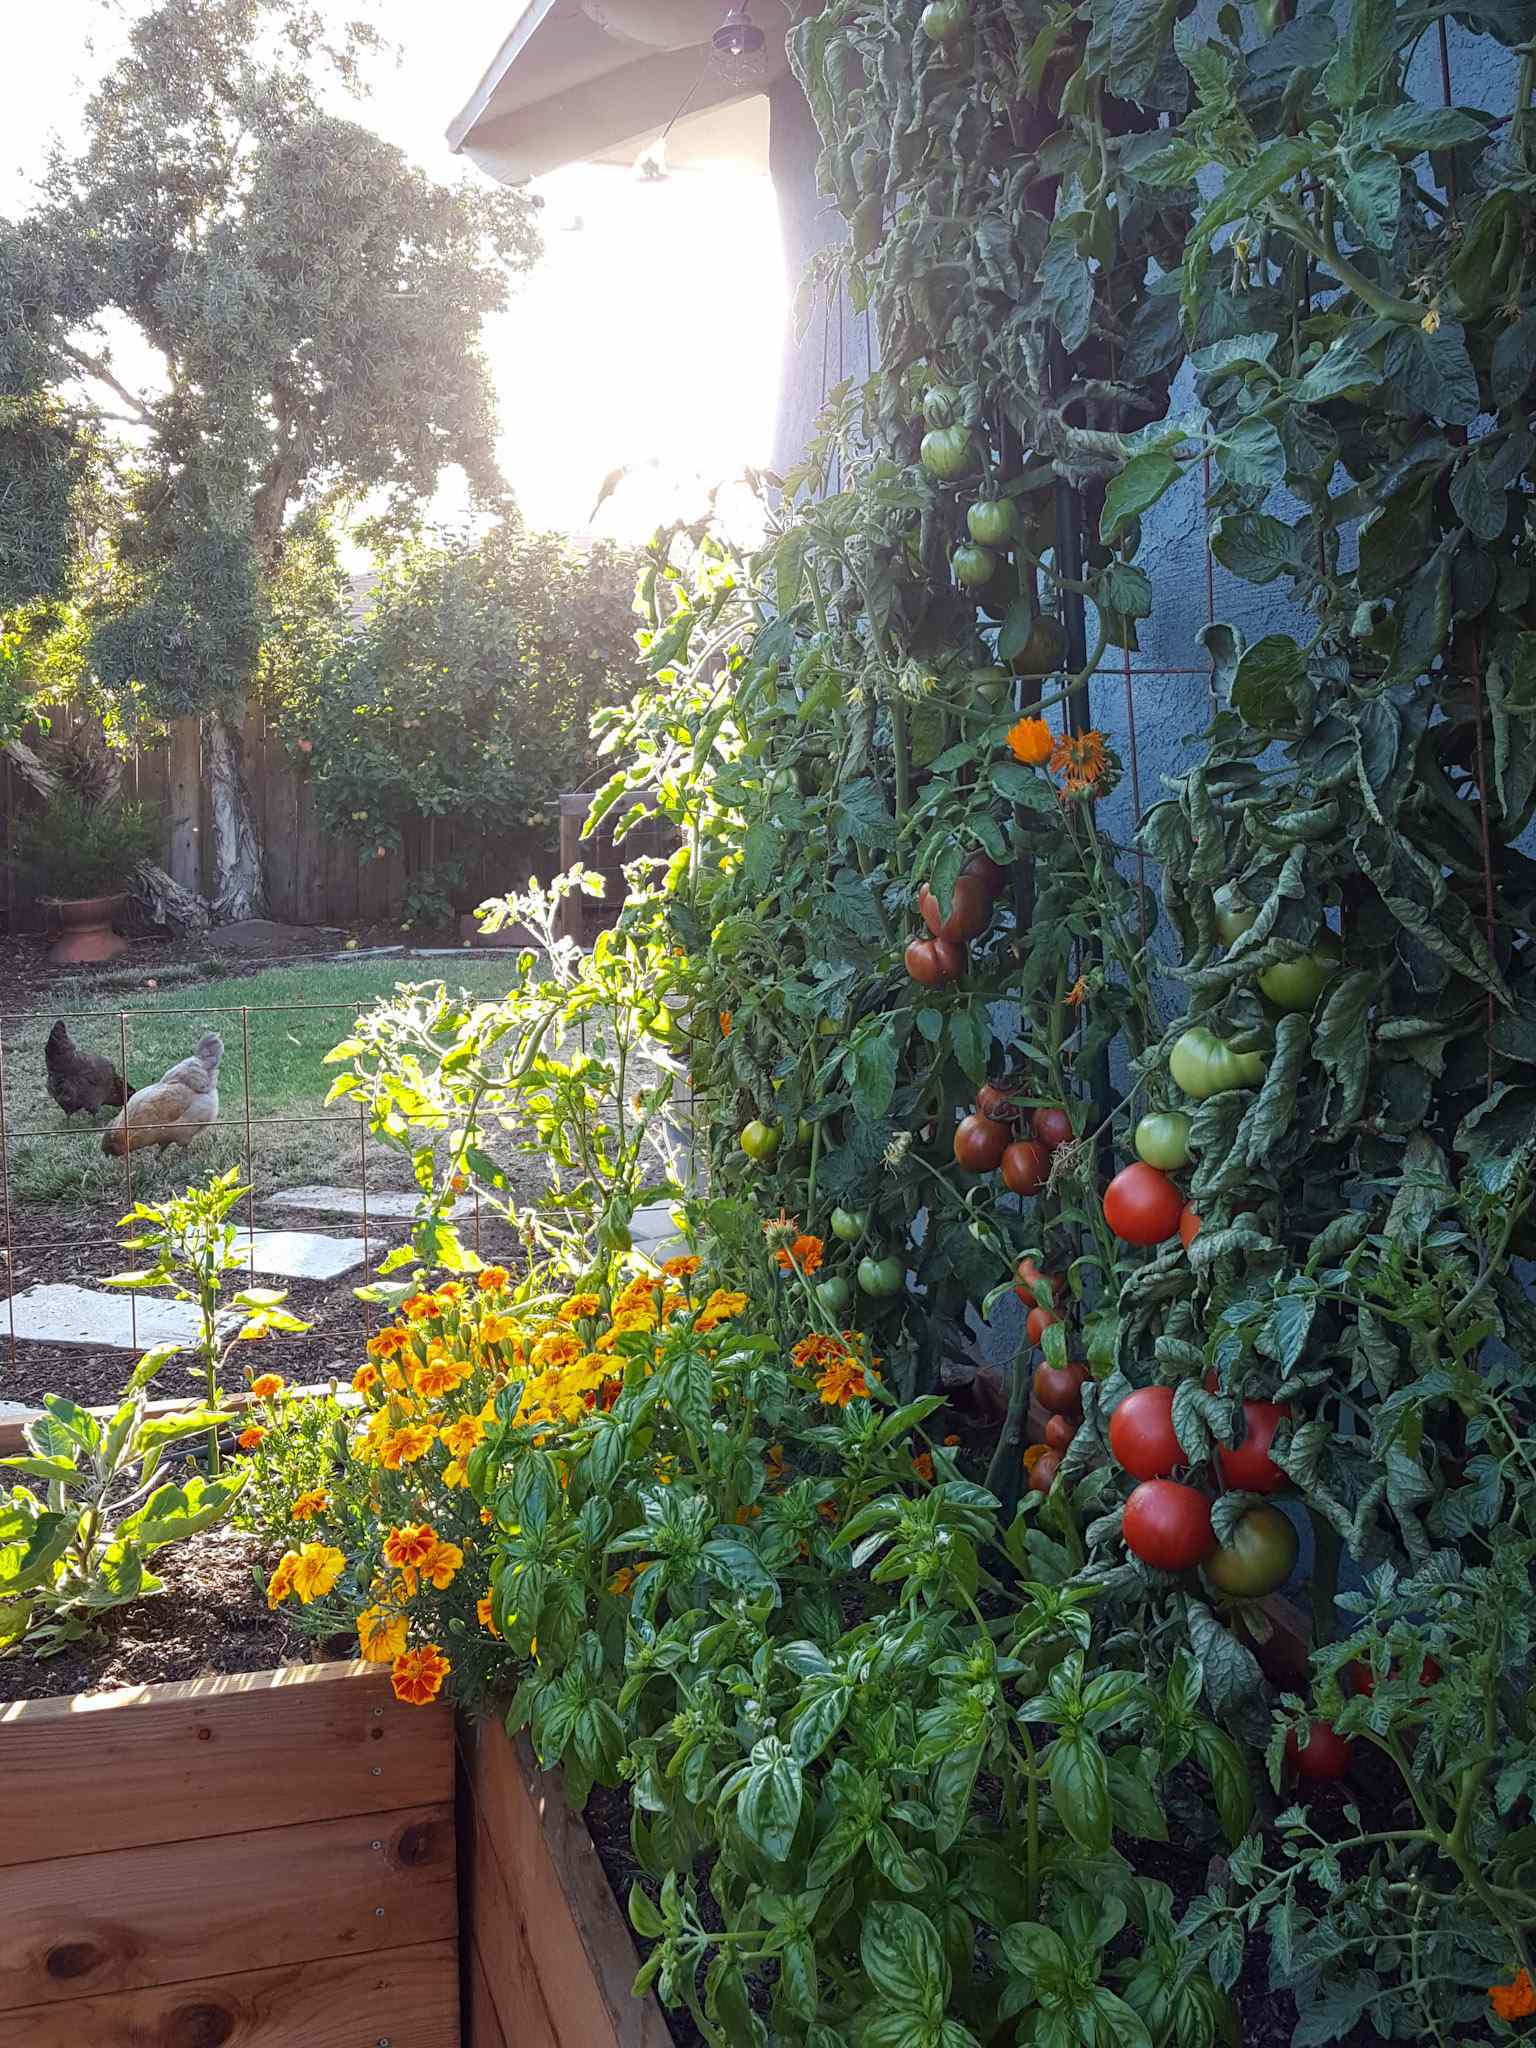 Tomatoes growing up a trellis next to a house are shown. They are making their way towards the roof of the house. There are many ripe and unripe tomatoes of varying colors. In front of the tomatoes there are marigolds and basil growing with chickens in the background outside of the garden area as the setting sun casts a warm glow over the yard. 